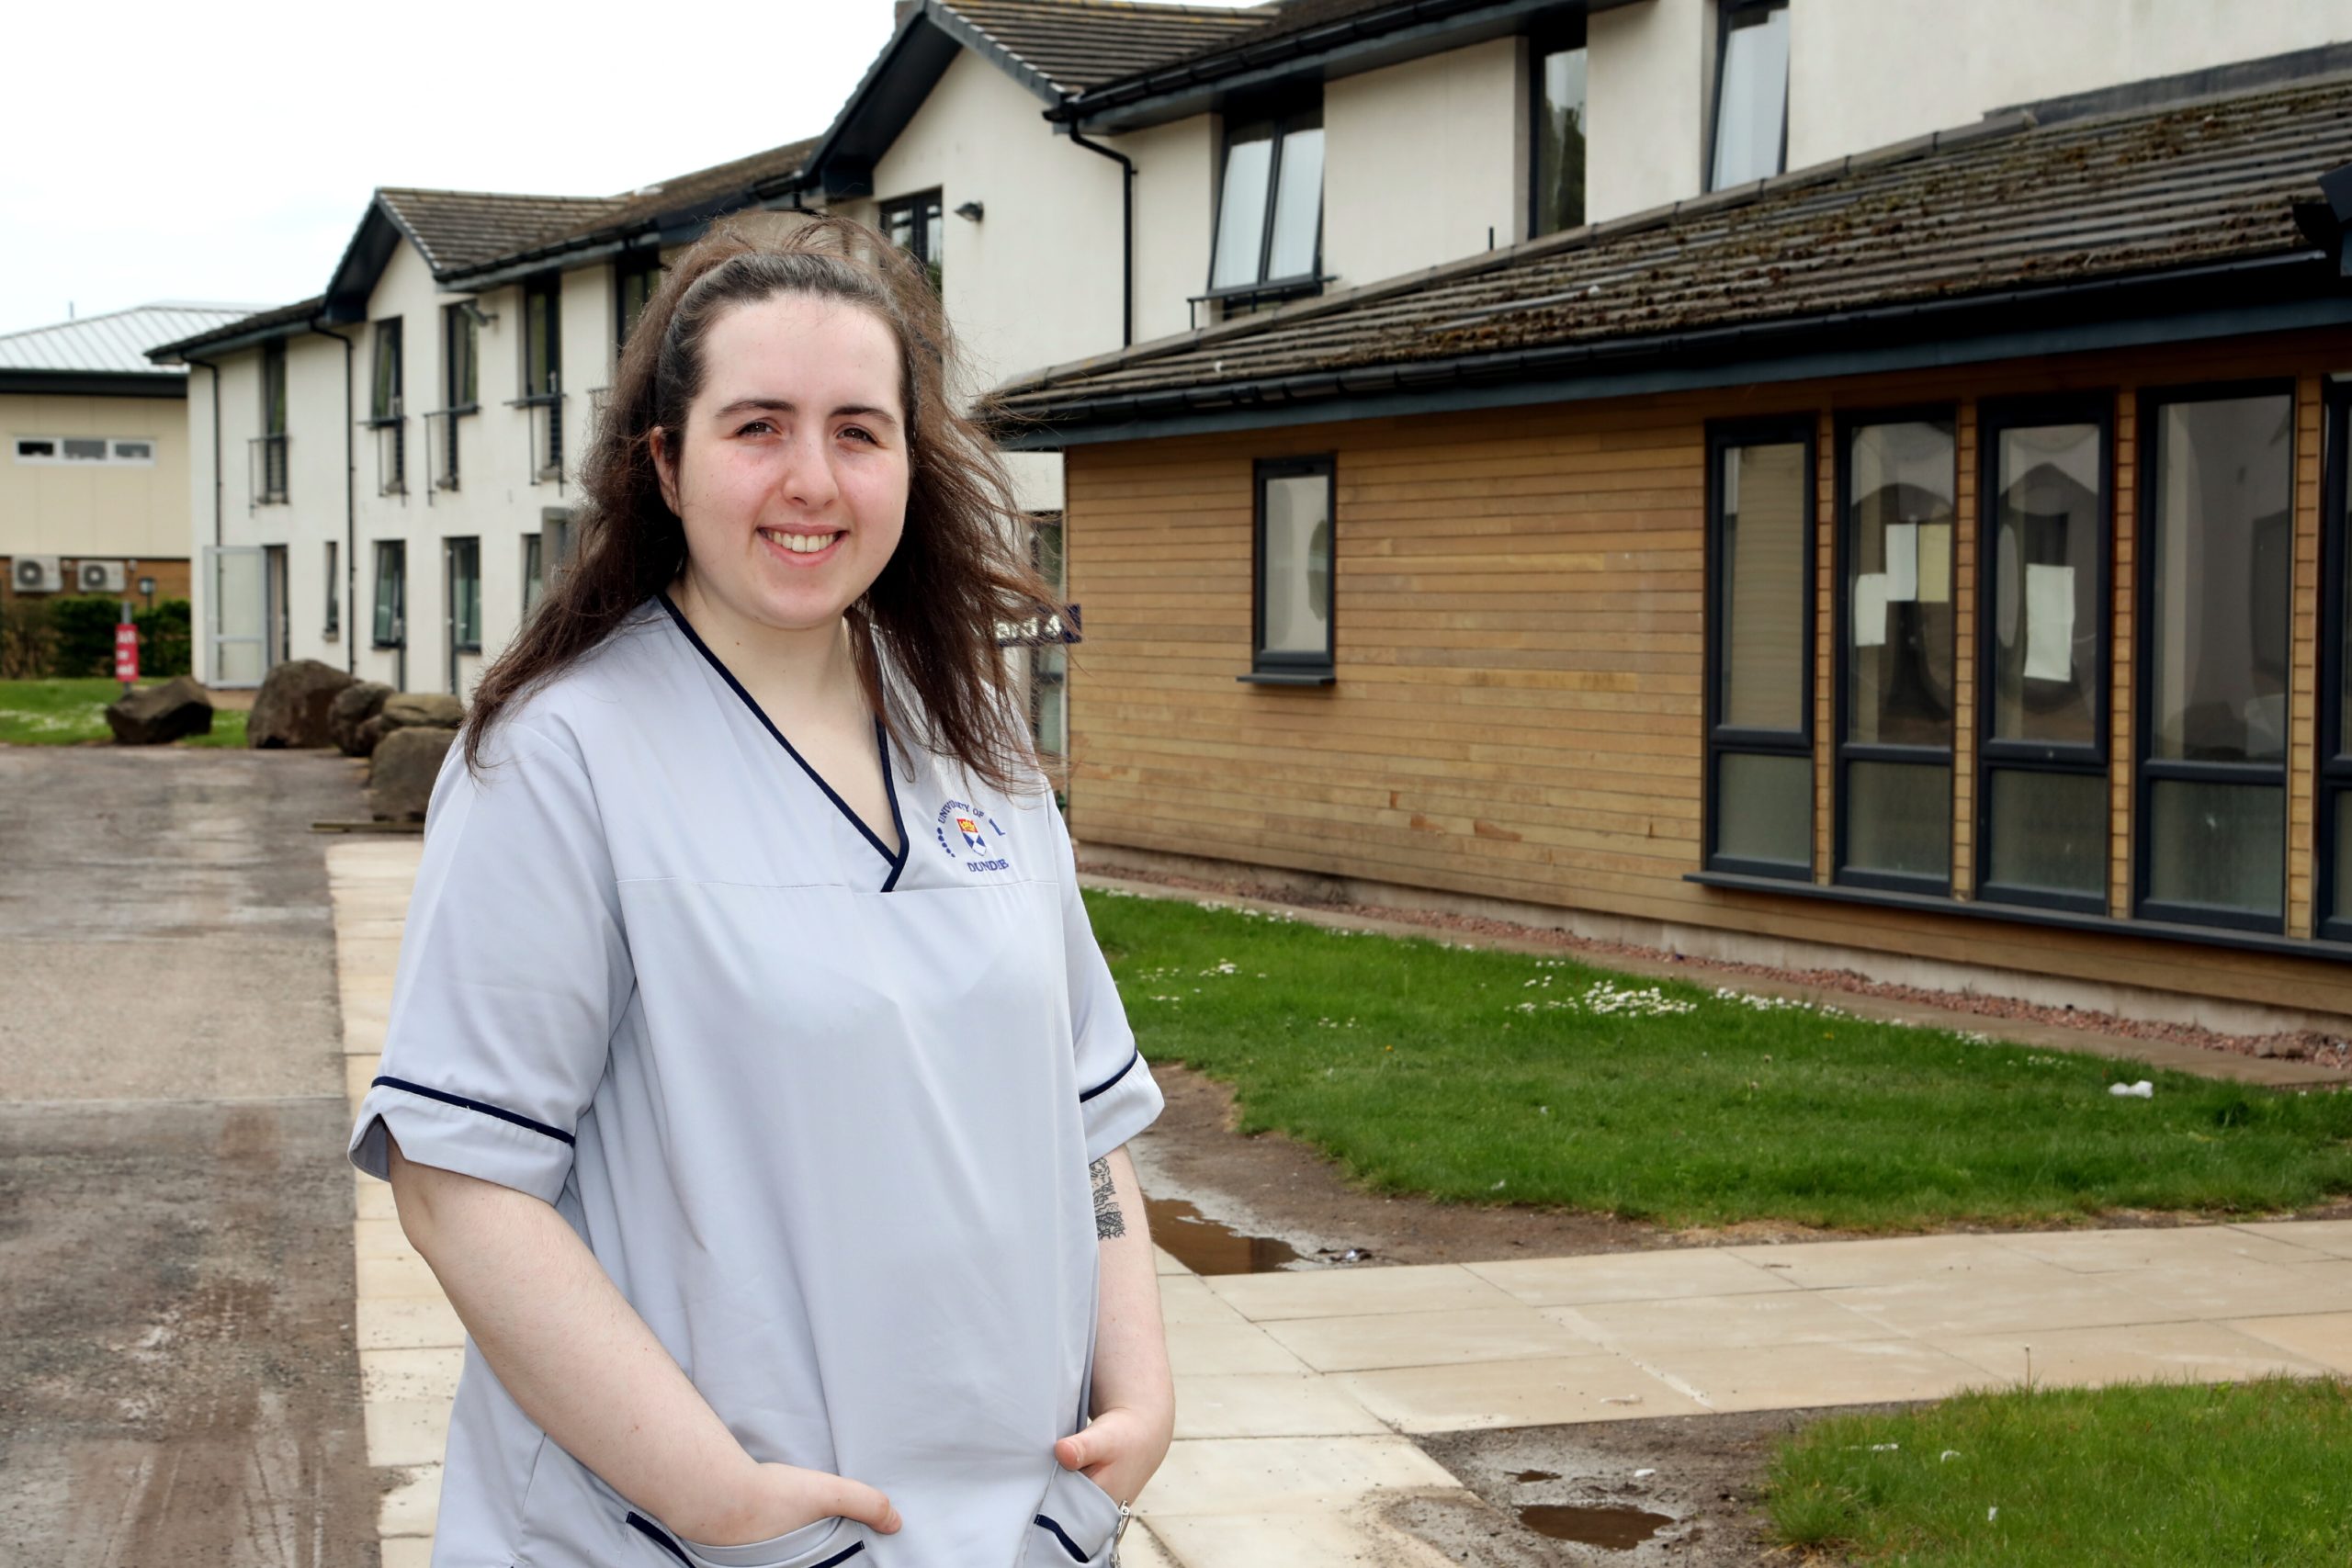 Amny Hood (20), has started her nursing career early, working at the Kingsway Care Centre in Dundee.